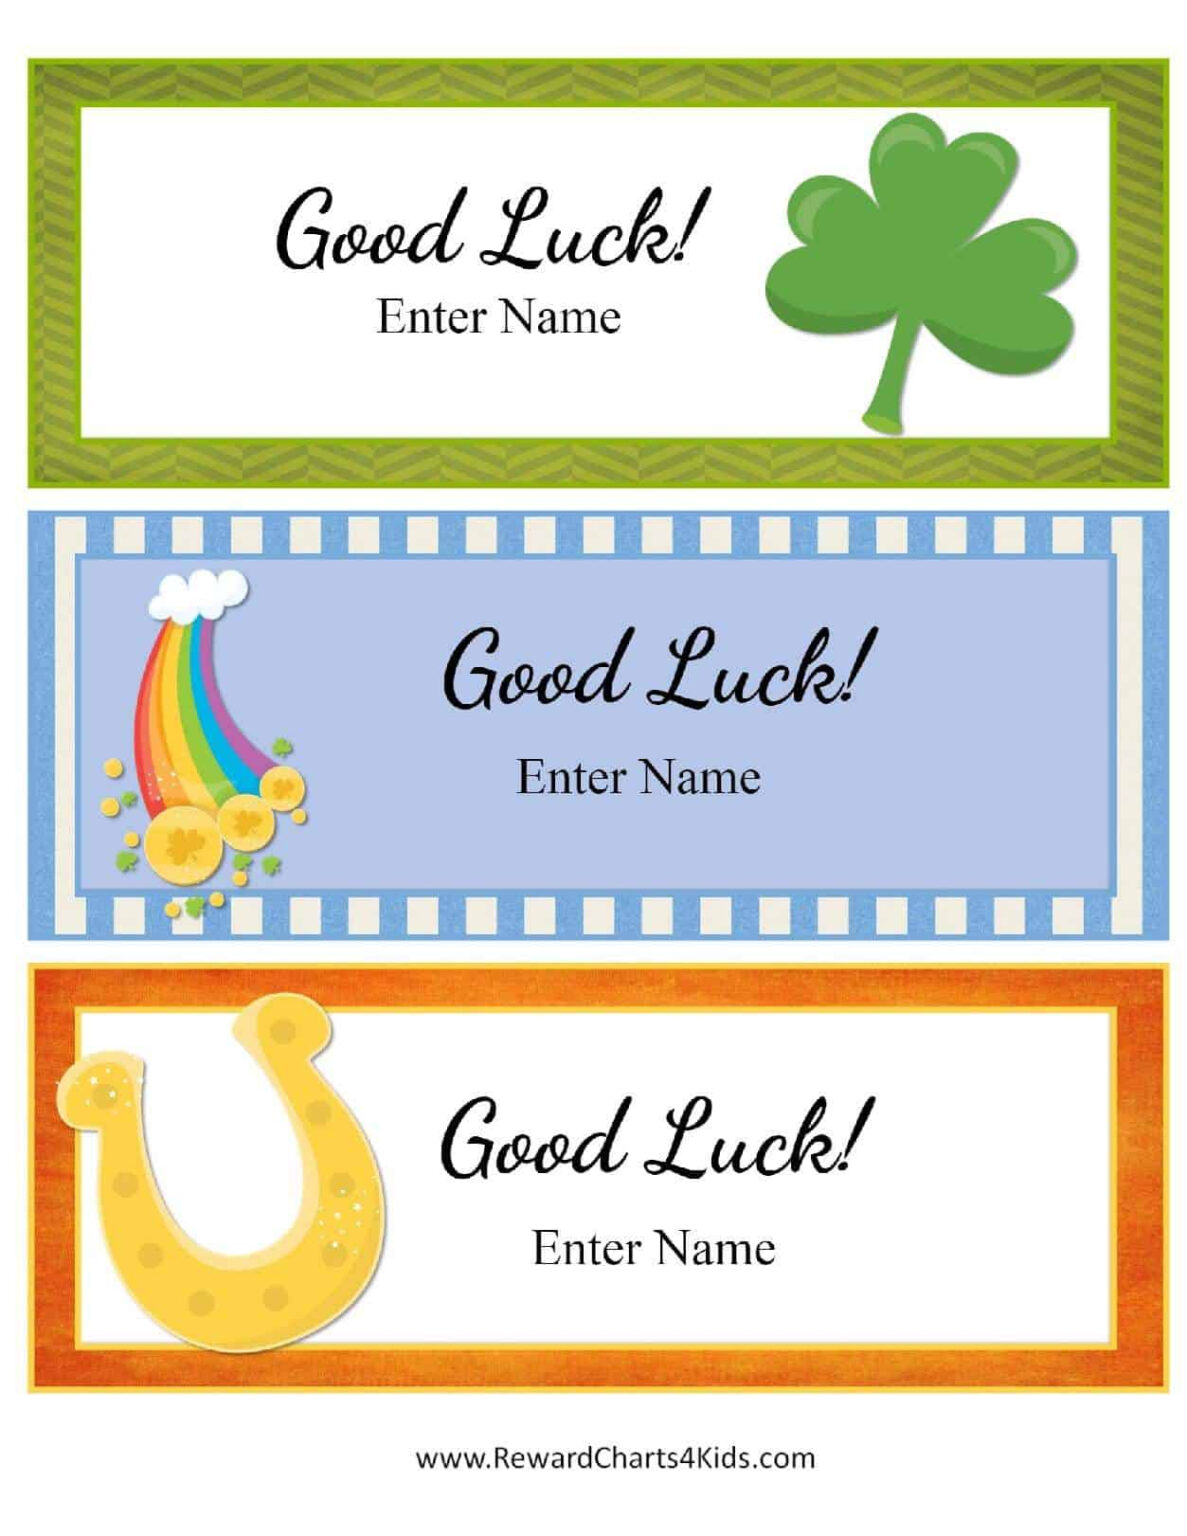 free-good-luck-cards-for-kids-customize-online-print-at-home-with